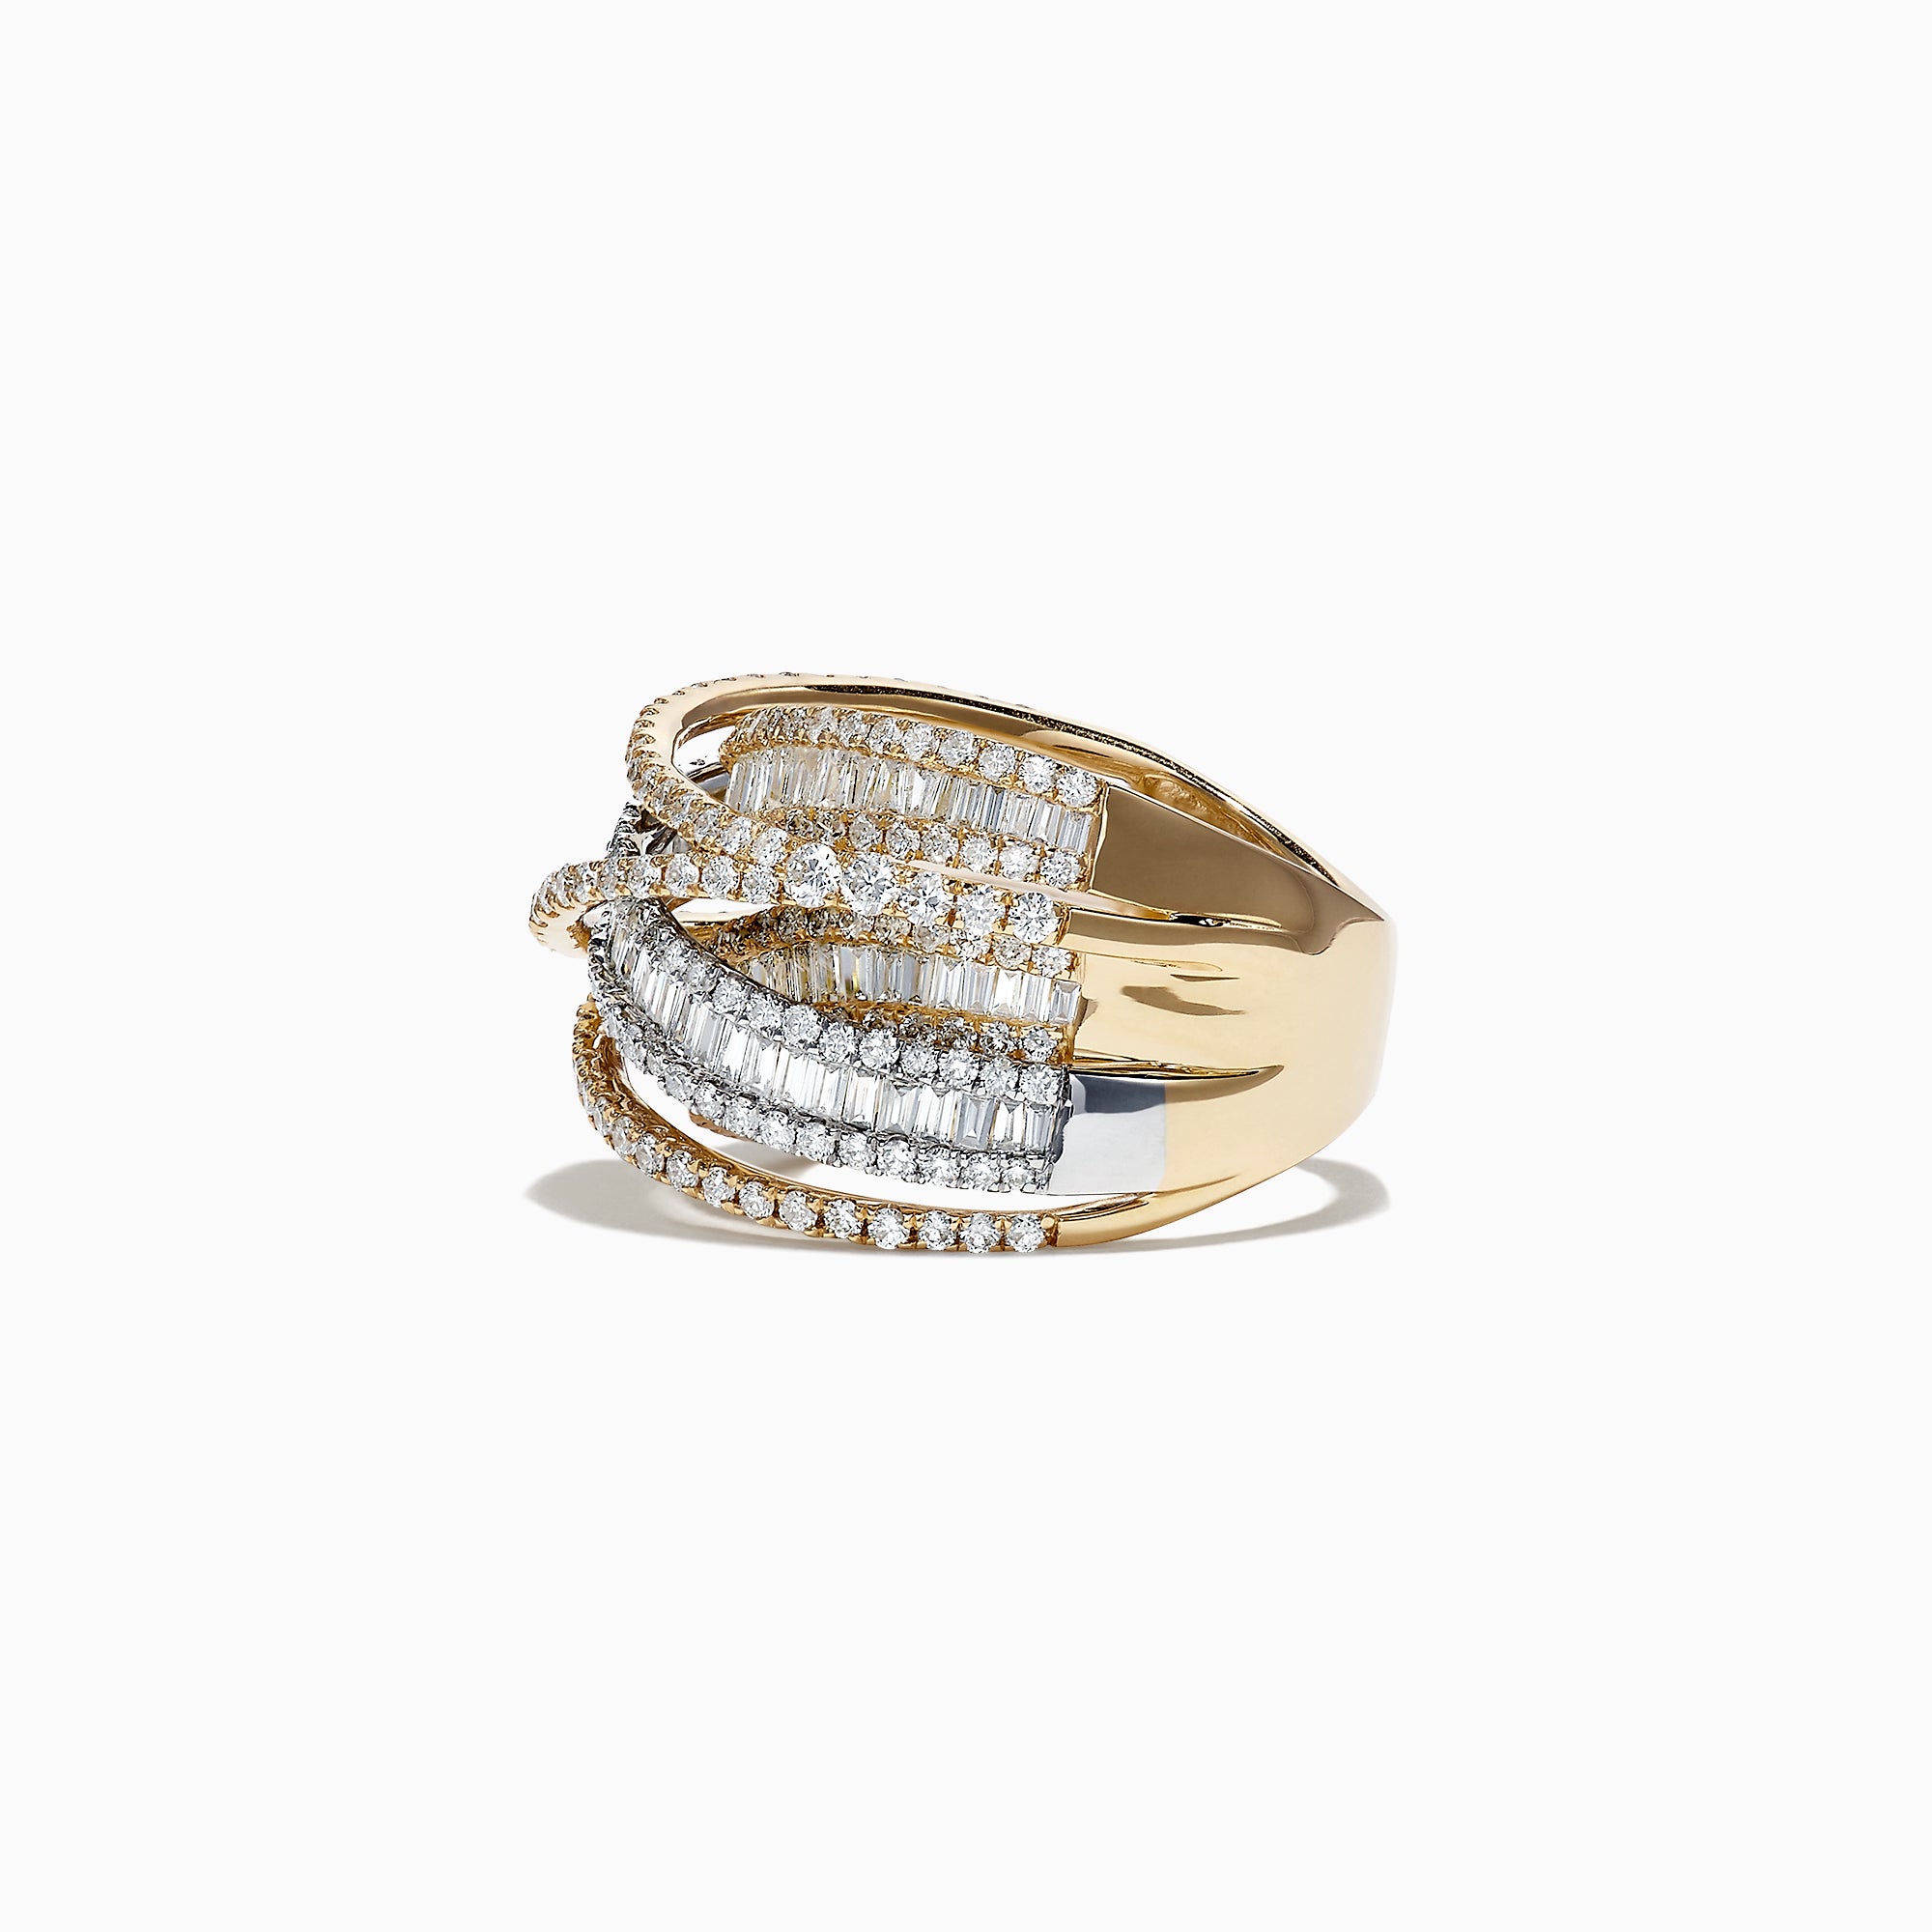 Effy Duo 14K White and Yellow Gold Diamond Crossover Ring, 2.75 TCW